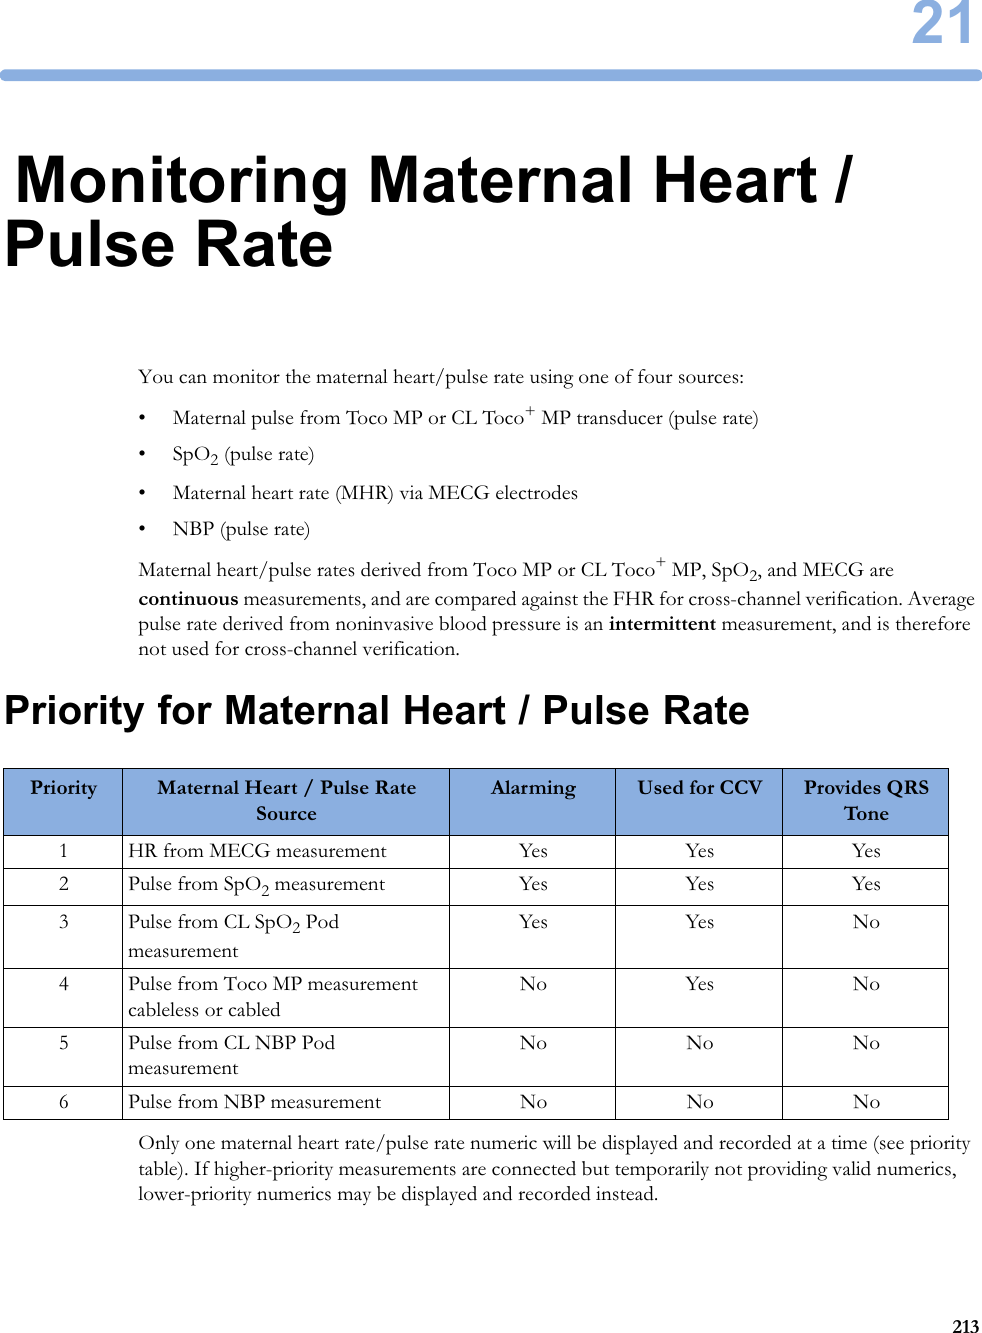 2121321Monitoring Maternal Heart / Pulse RateYou can monitor the maternal heart/pulse rate using one of four sources:• Maternal pulse from Toco MP or CL Toco+ MP transducer (pulse rate)• SpO2 (pulse rate)• Maternal heart rate (MHR) via MECG electrodes• NBP (pulse rate)Maternal heart/pulse rates derived from Toco MP or CL Toco+ MP, SpO2, and MECG are continuous measurements, and are compared against the FHR for cross-channel verification. Average pulse rate derived from noninvasive blood pressure is an intermittent measurement, and is therefore not used for cross-channel verification.Priority for Maternal Heart / Pulse RateOnly one maternal heart rate/pulse rate numeric will be displayed and recorded at a time (see priority table). If higher-priority measurements are connected but temporarily not providing valid numerics, lower-priority numerics may be displayed and recorded instead.Priority Maternal Heart / Pulse Rate SourceAlarming Used for CCV Provides QRS Tone1 HR from MECG measurement Yes Yes Yes2 Pulse from SpO2 measurement Yes Yes Yes3 Pulse from CL SpO2 Pod measurementYes Yes No4 Pulse from Toco MP measurement cableless or cabled No Yes No5 Pulse from CL NBP Pod measurementNo No No6 Pulse from NBP measurement No No No